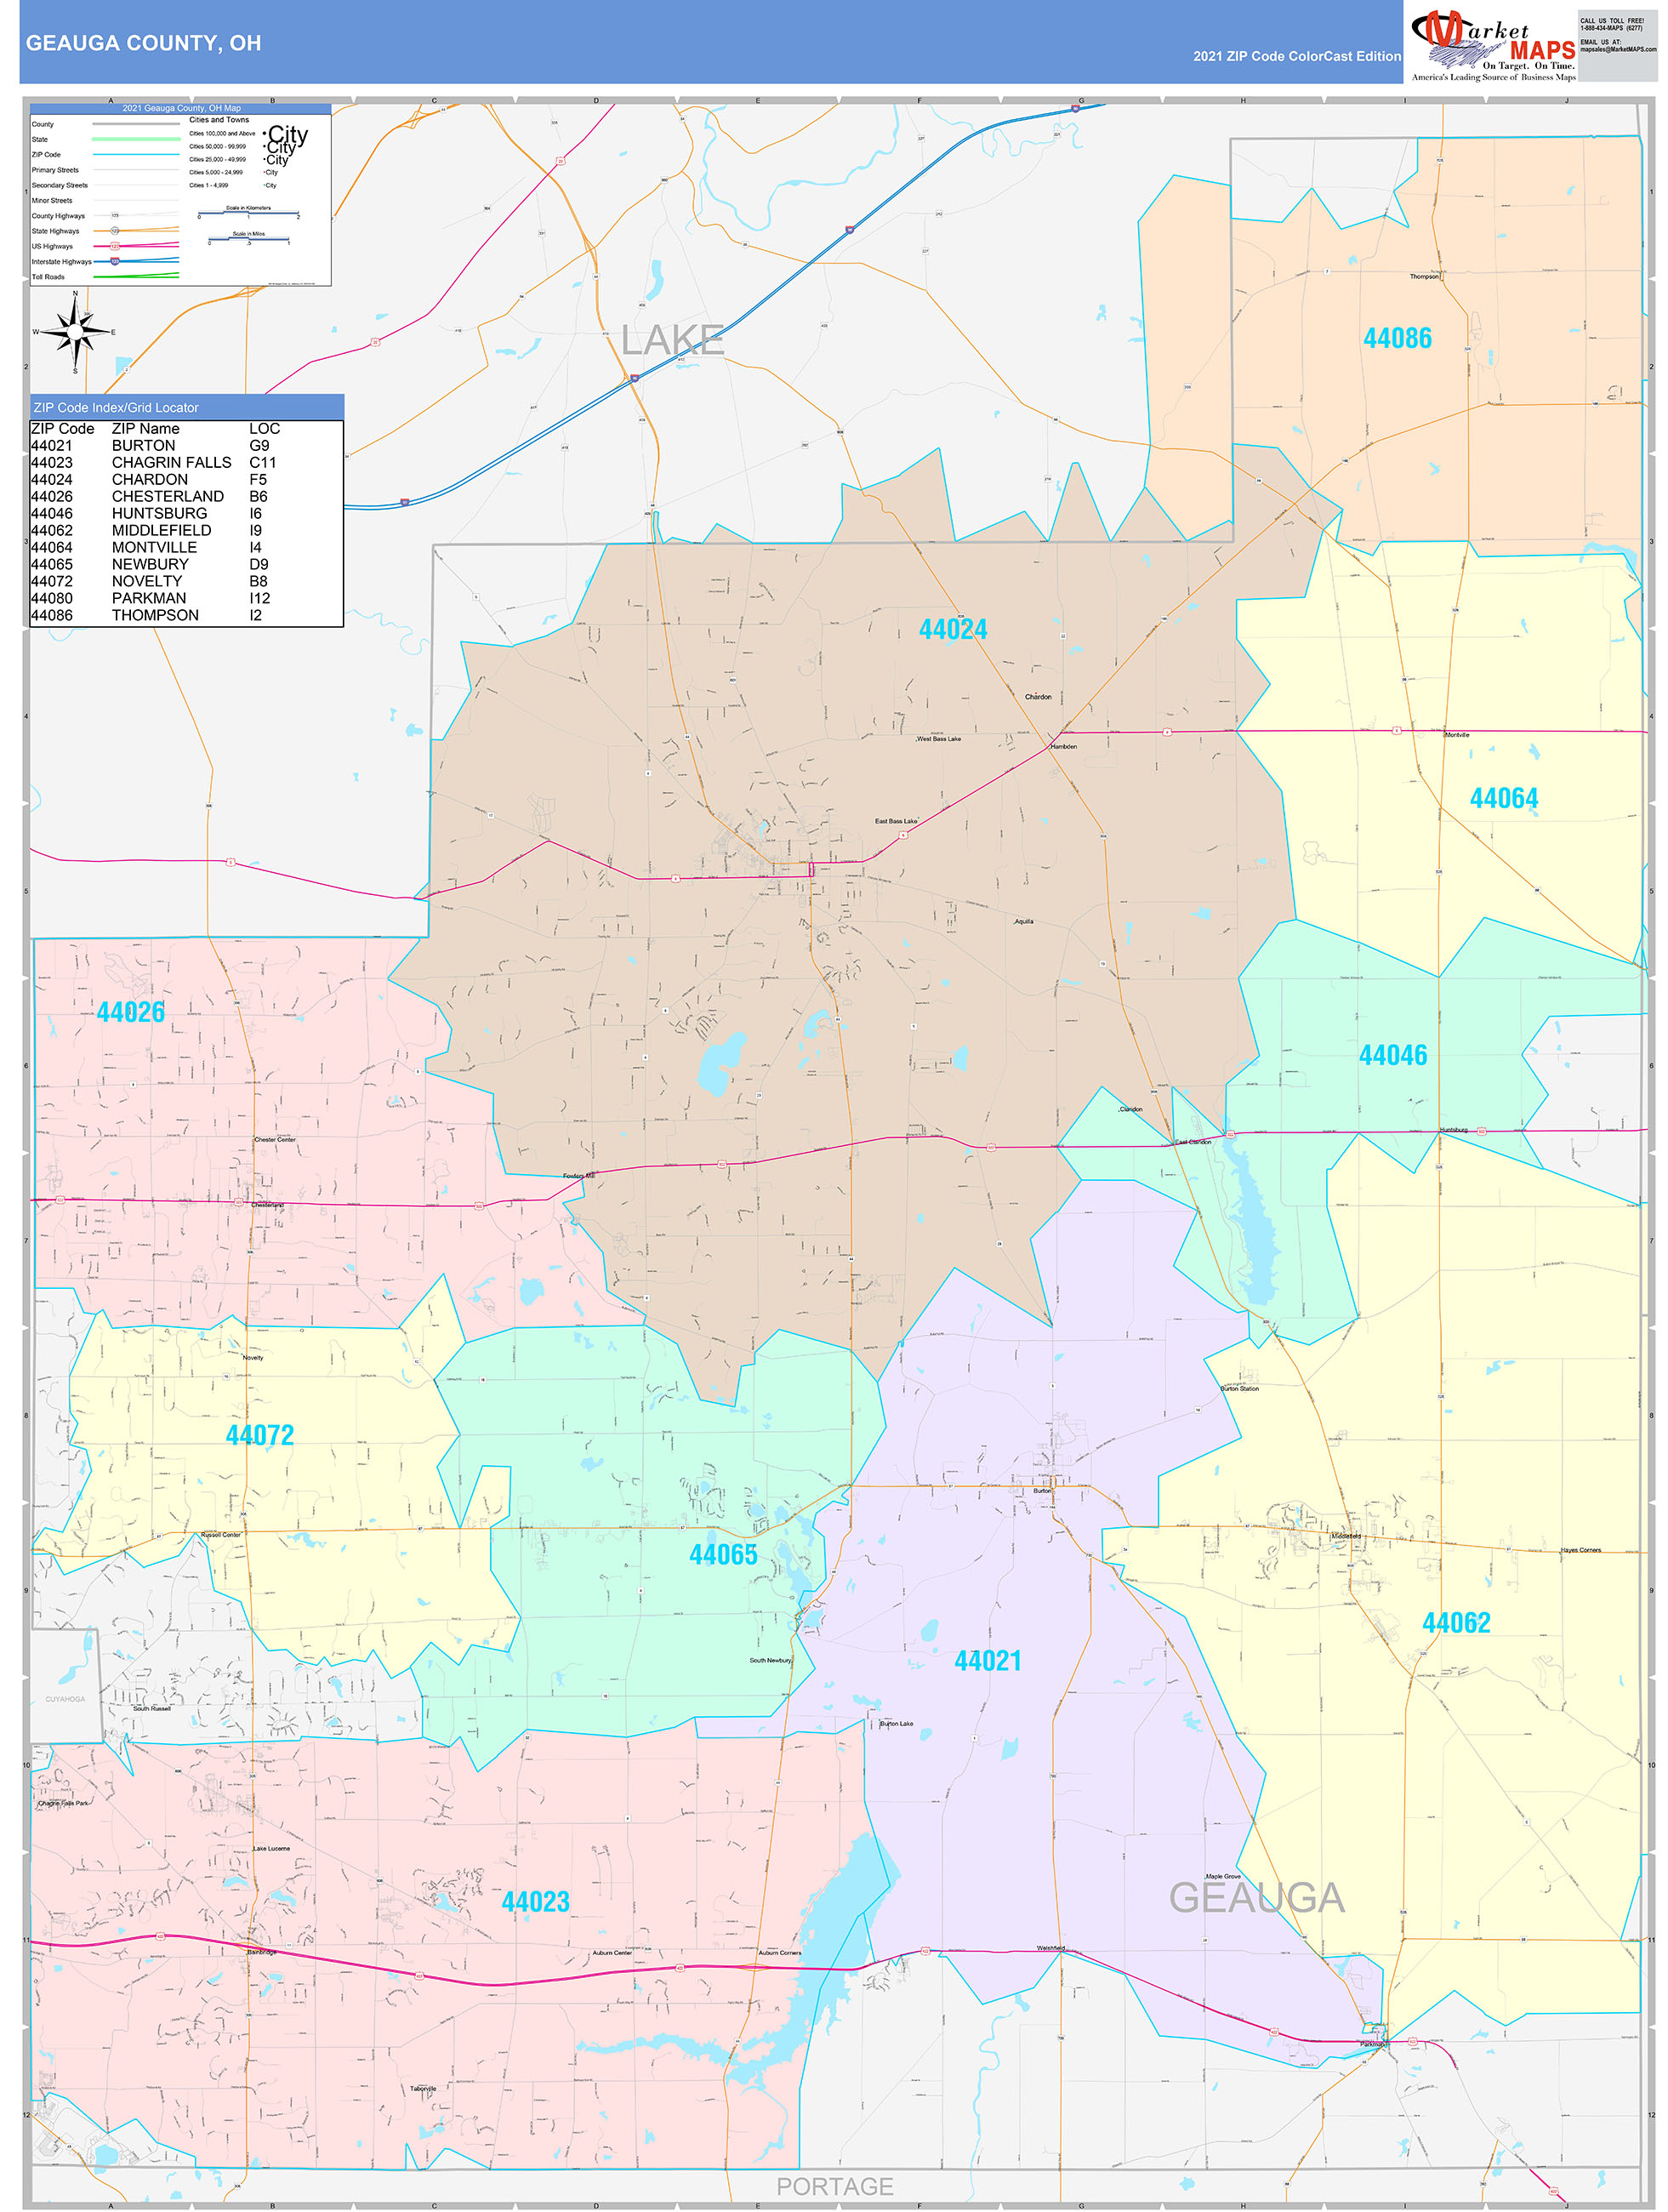 geauga-county-oh-wall-map-color-cast-style-by-marketmaps-mapsales